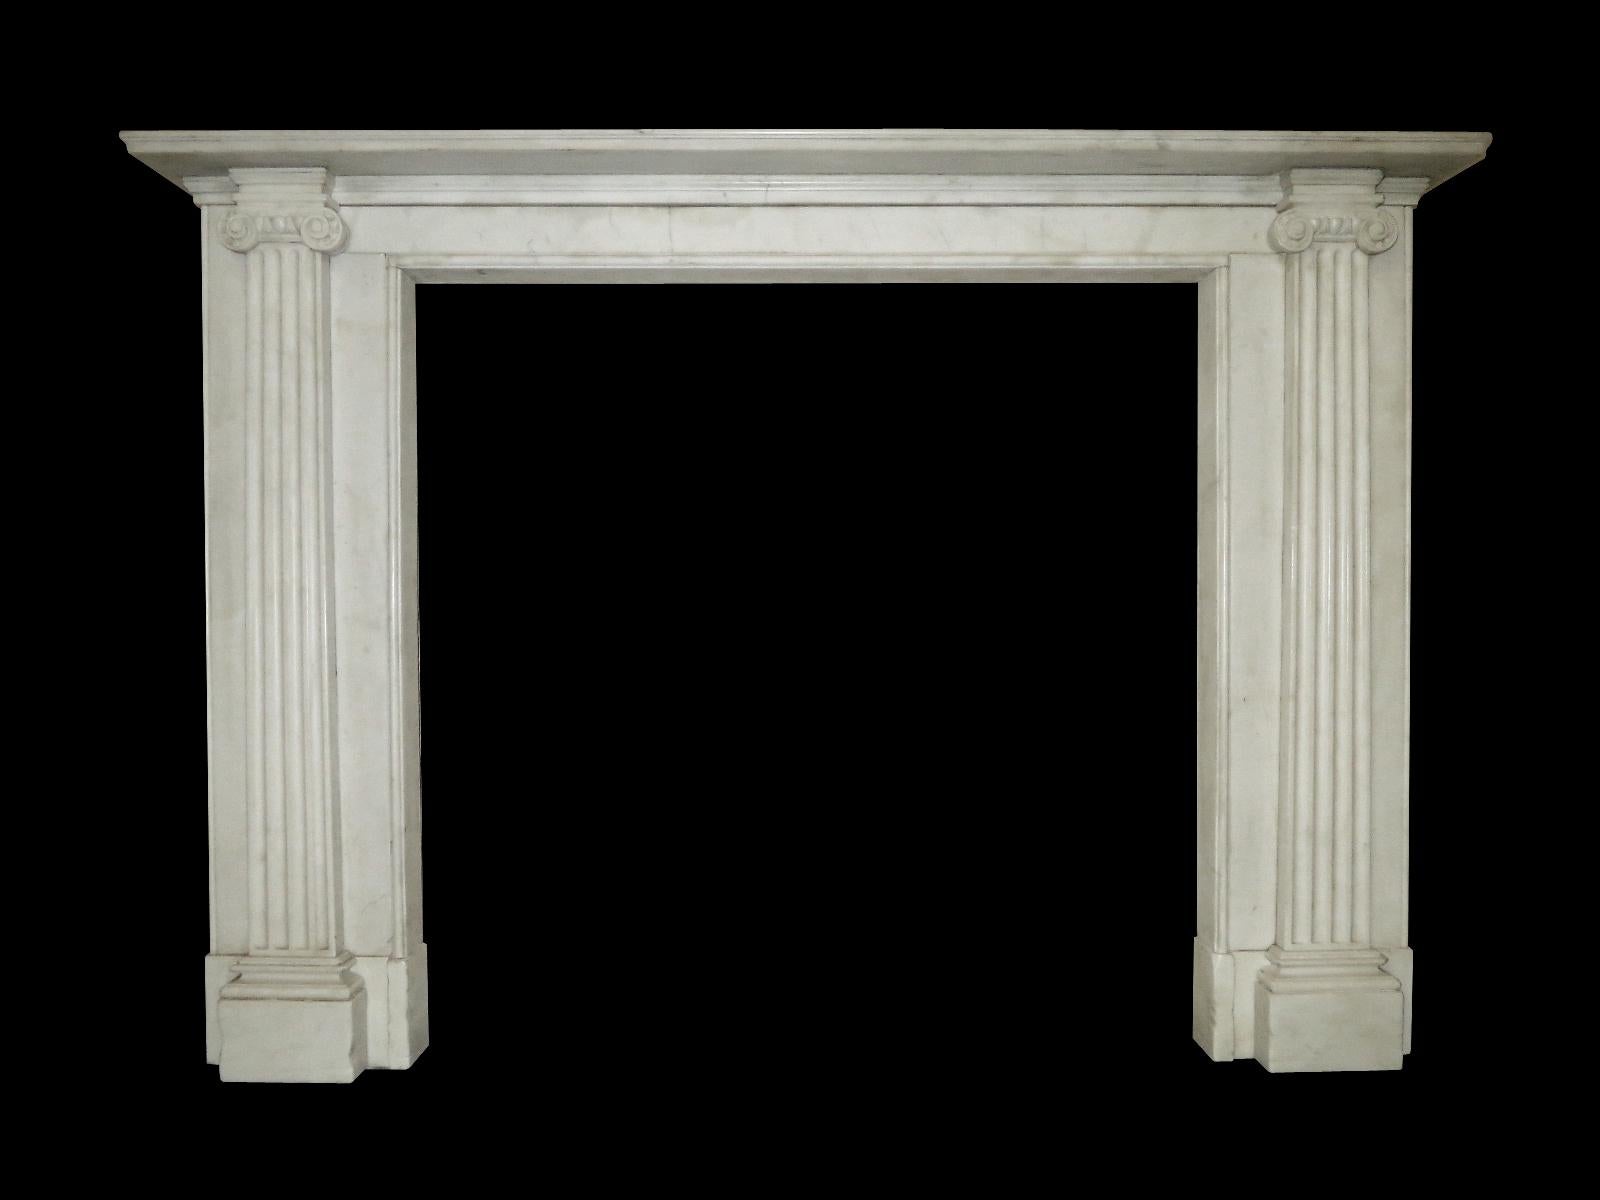 A late 20th century copy of a period piece, having fluted pilaster jambs capped with classical ionic capitals. A very slim frieze and simple moulded shelf. A large piece, very well aged and distressed. 

Measures: Opening sizes 108.5cm wide x